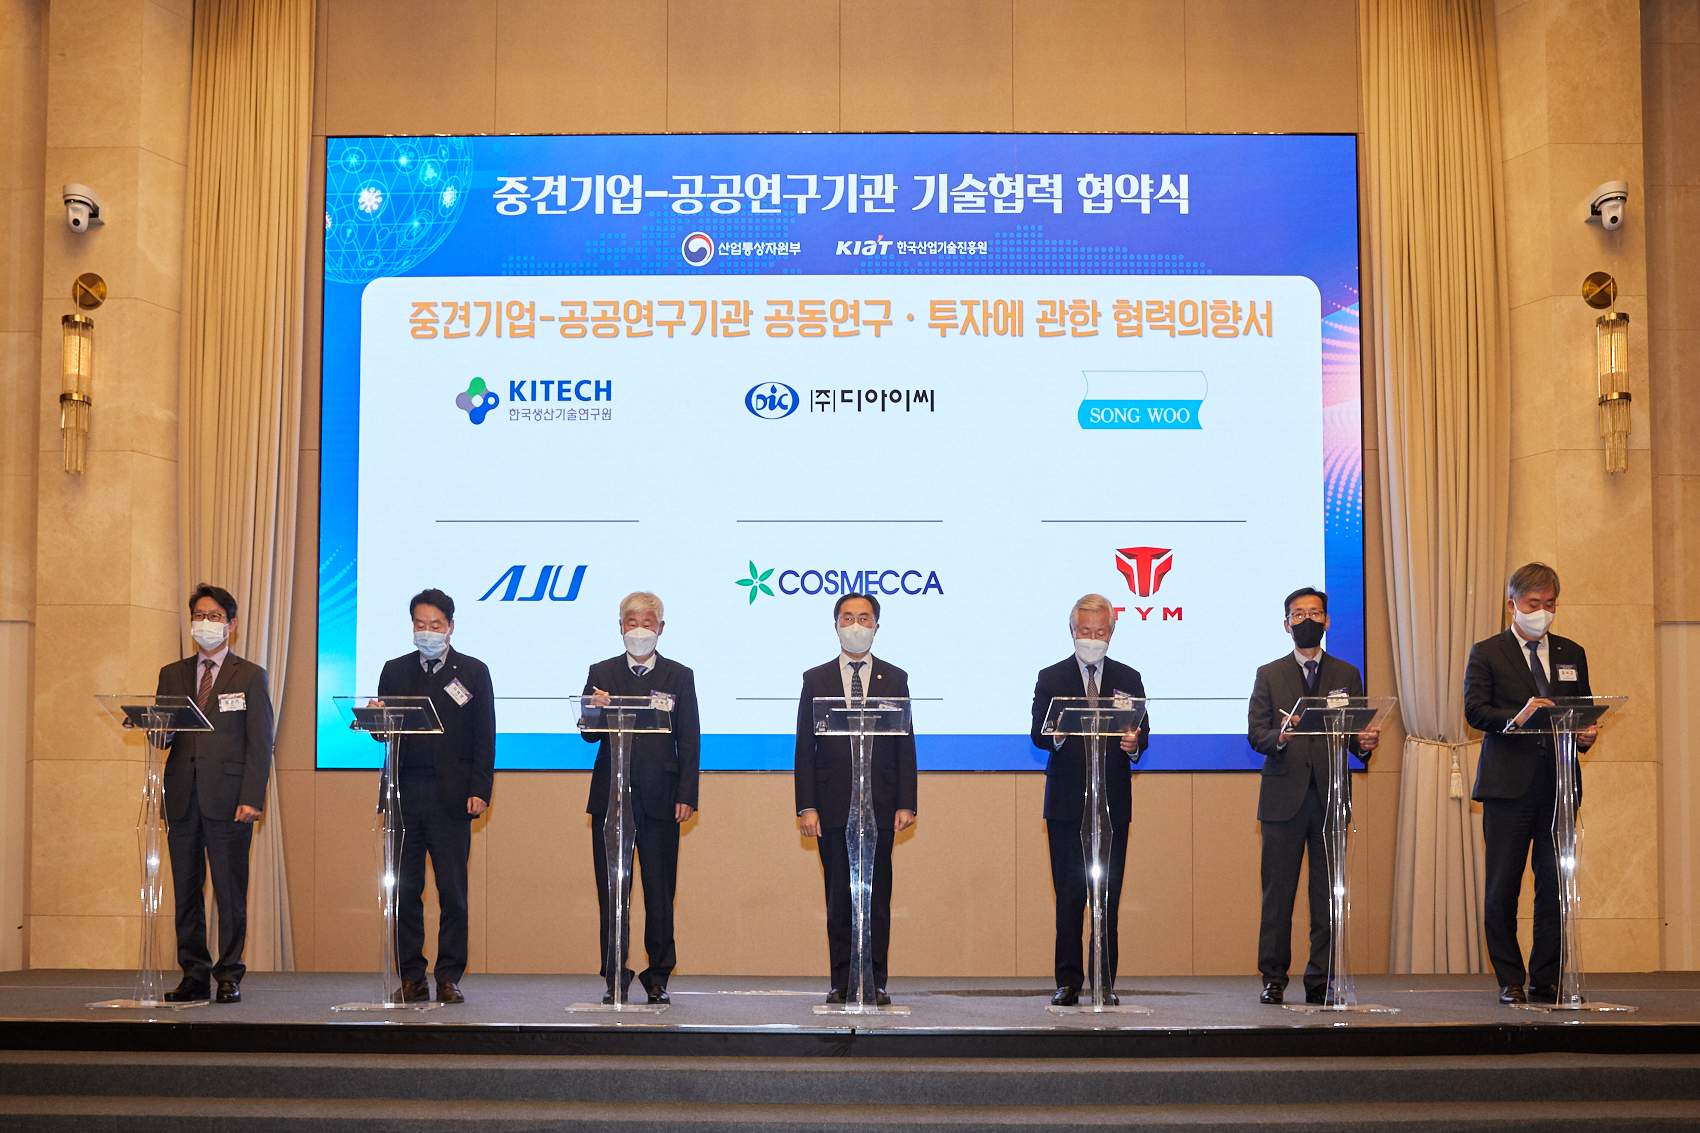 TYM-Public Research Institute signed a technology cooperation agreement ceremony for the Technology Innovation Challenge.Speed up the development of new technologies.